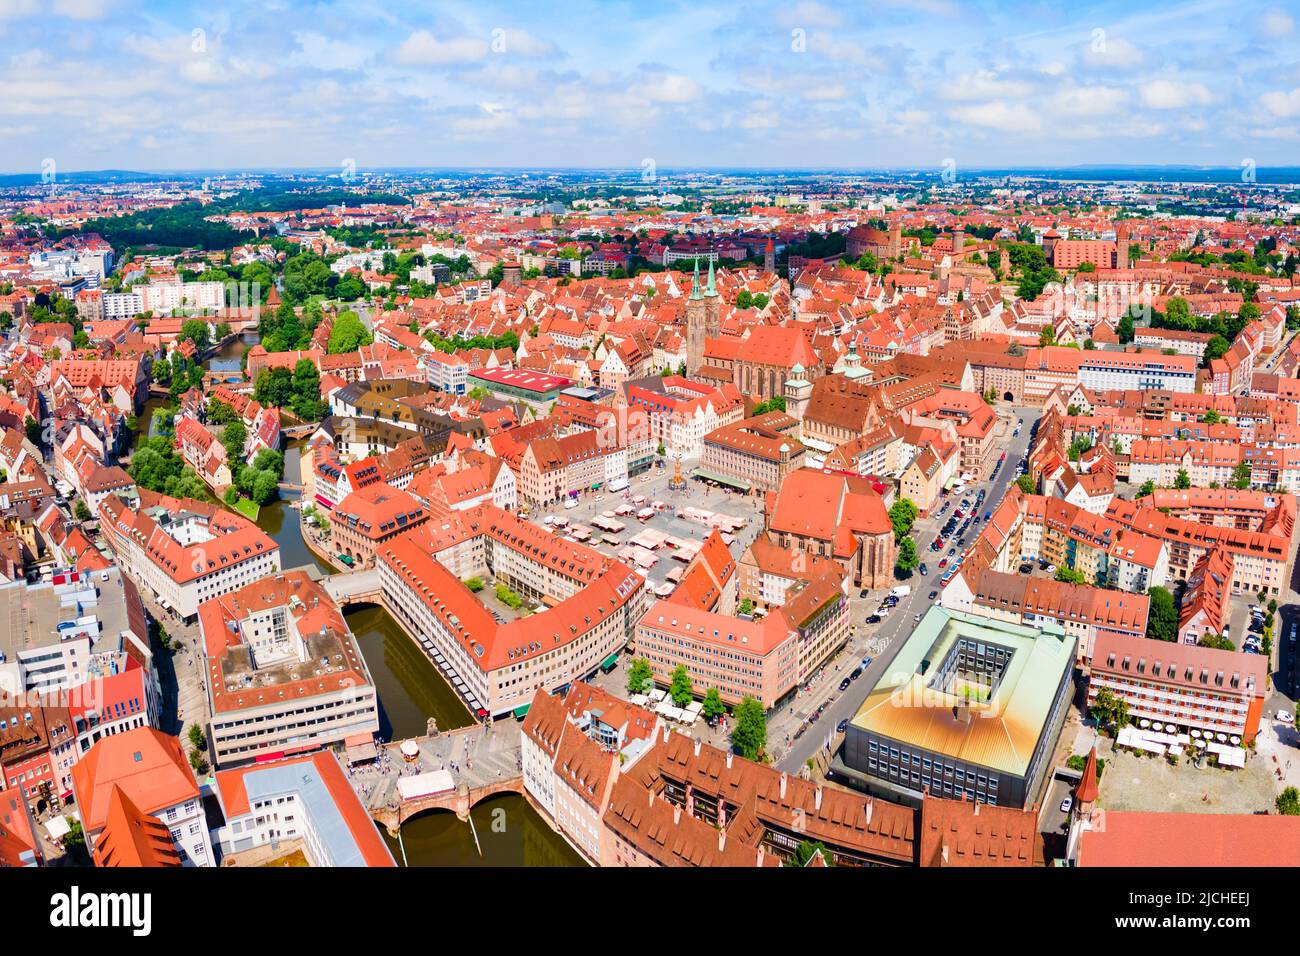 Nuremberg old town aerial panoramic view. Nuremberg is the second largest city of Bavaria state in Germany. Stock Photo